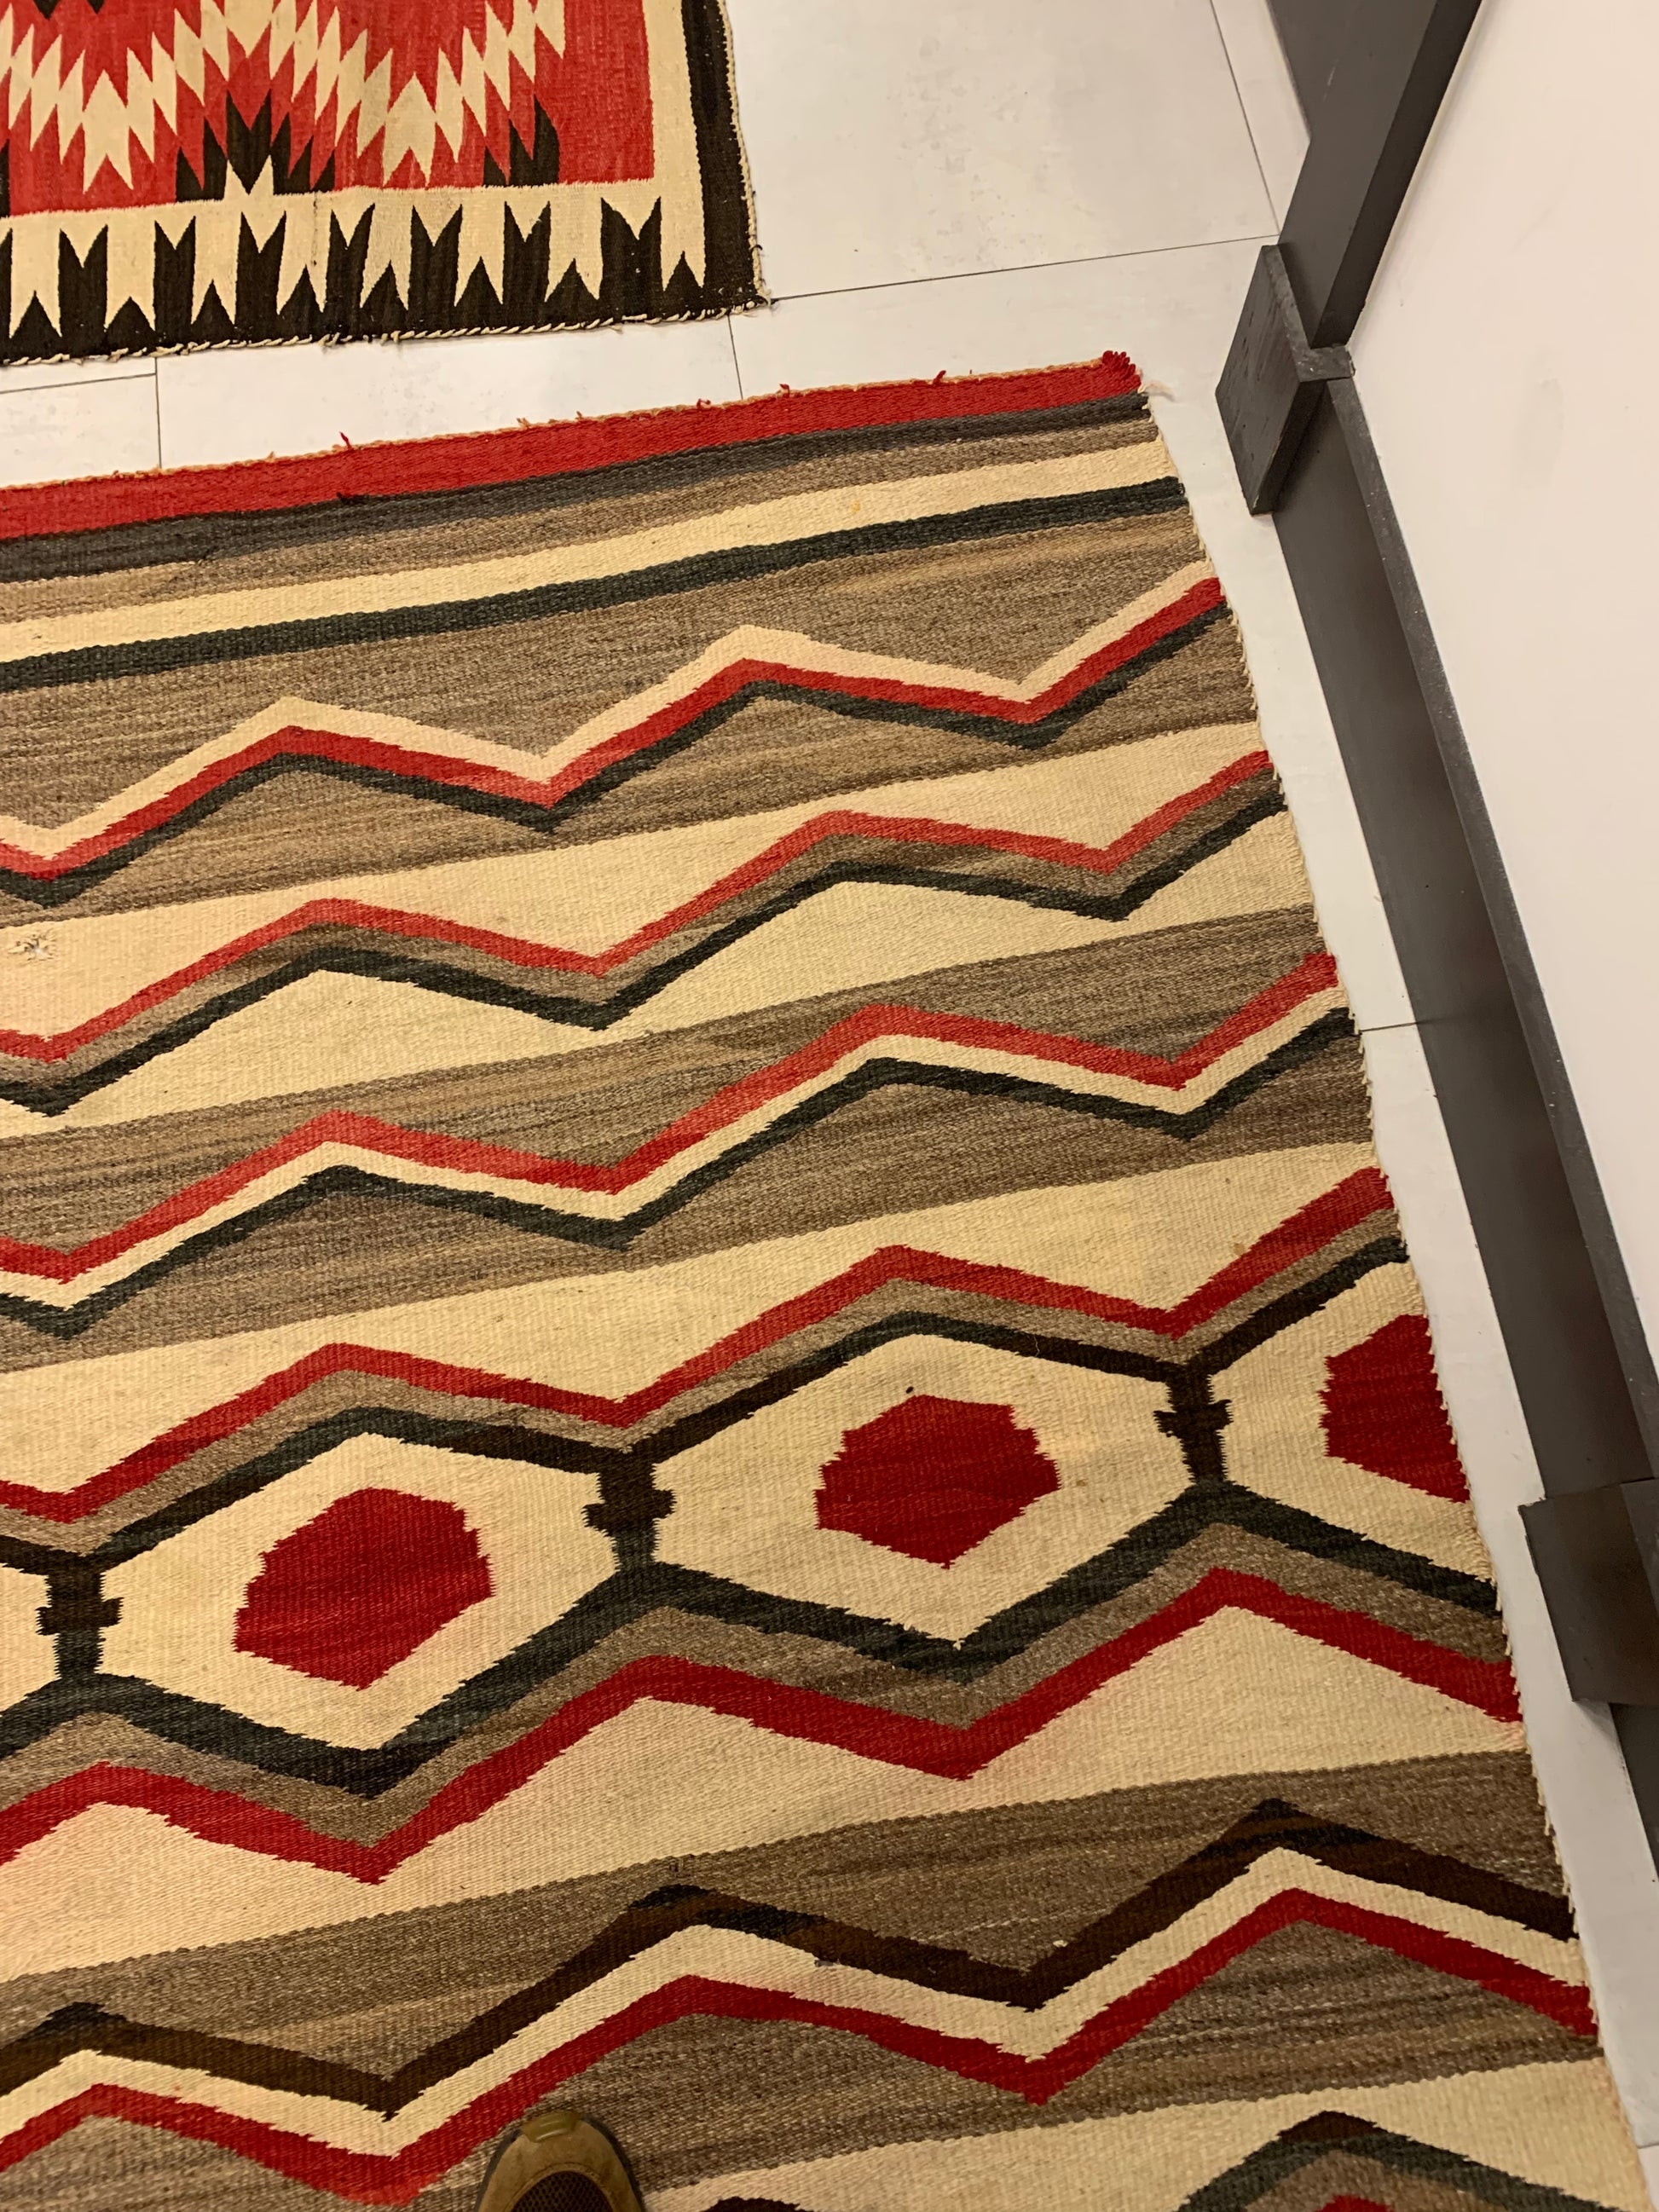 Close-up of the complex geometric pattern on the Handmade Antique Native American Navajo Rug Blanket